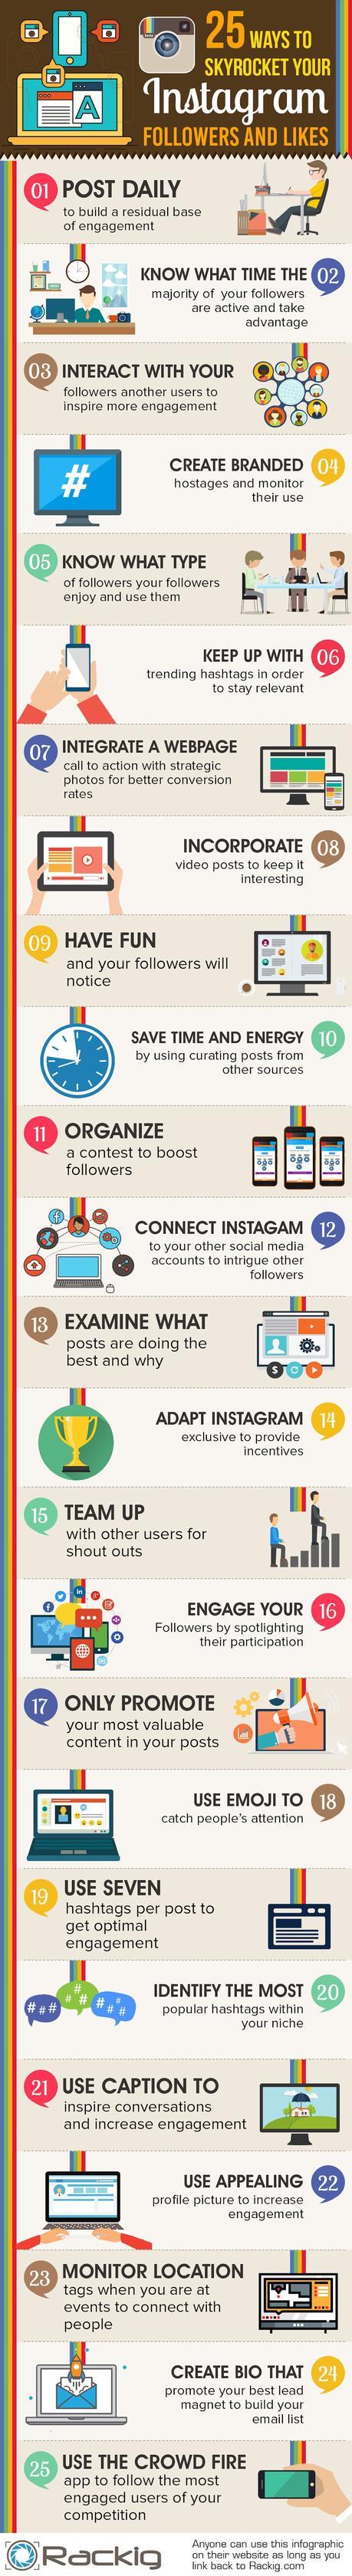 25-ways-to-skyrocket-your-instagram-followers-and-likes